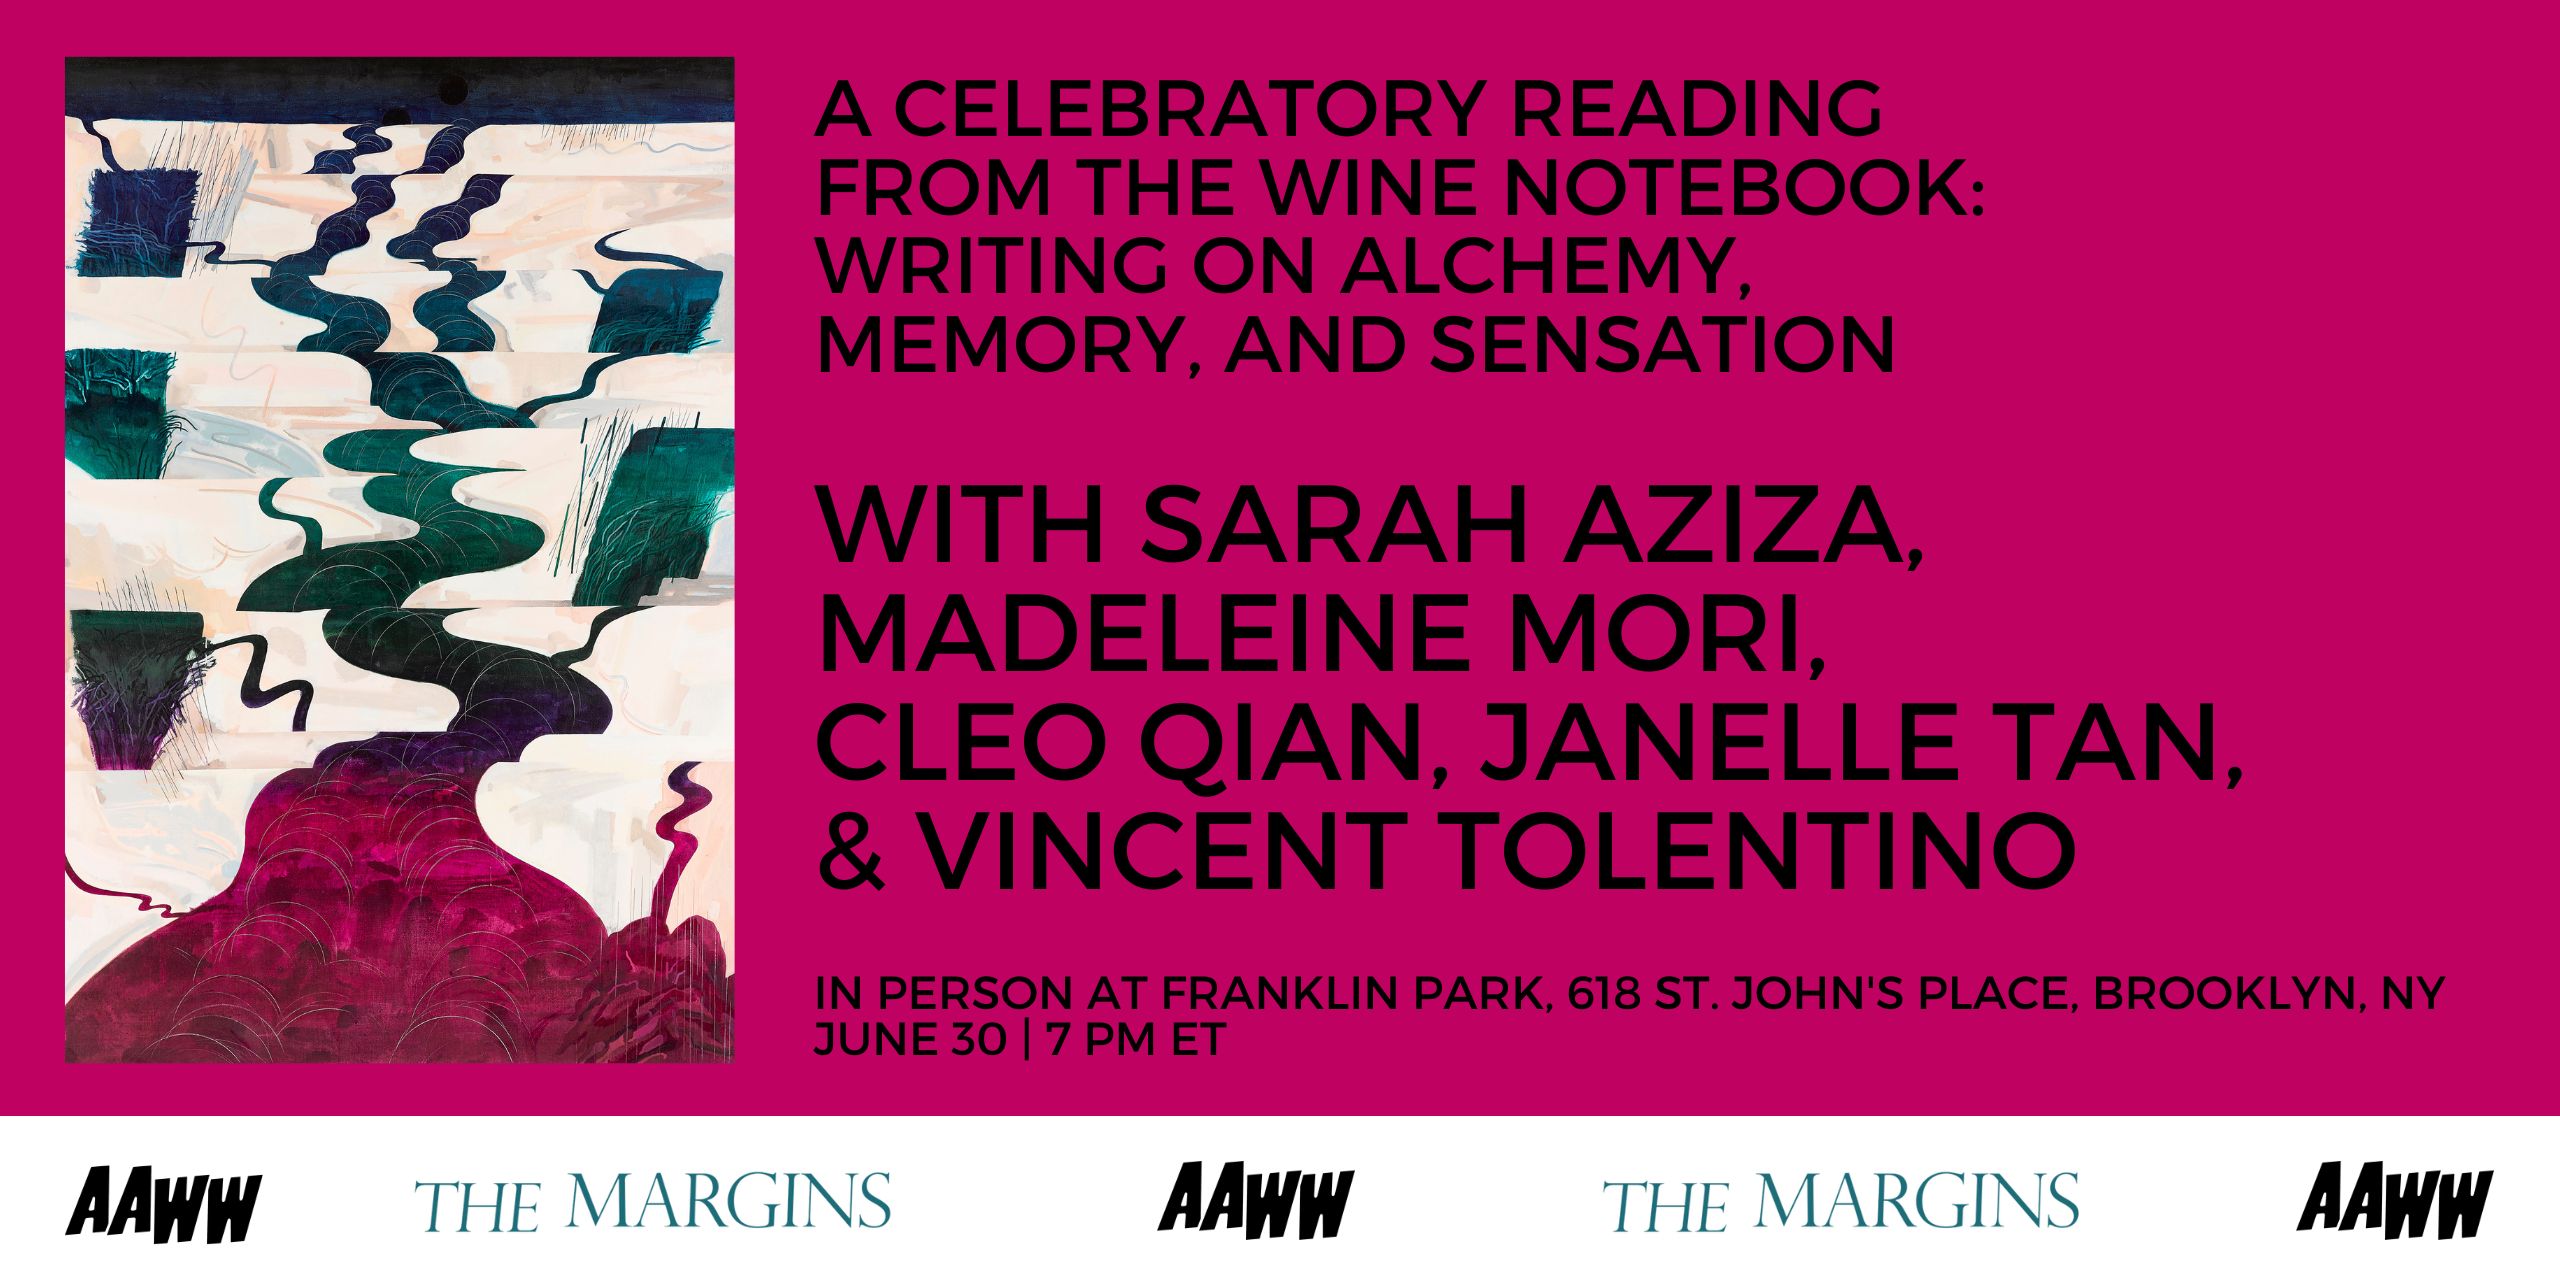 [LIVE] A Celebratory Reading from the Wine Notebook: Writing on Alchemy, Memory, and Sensation